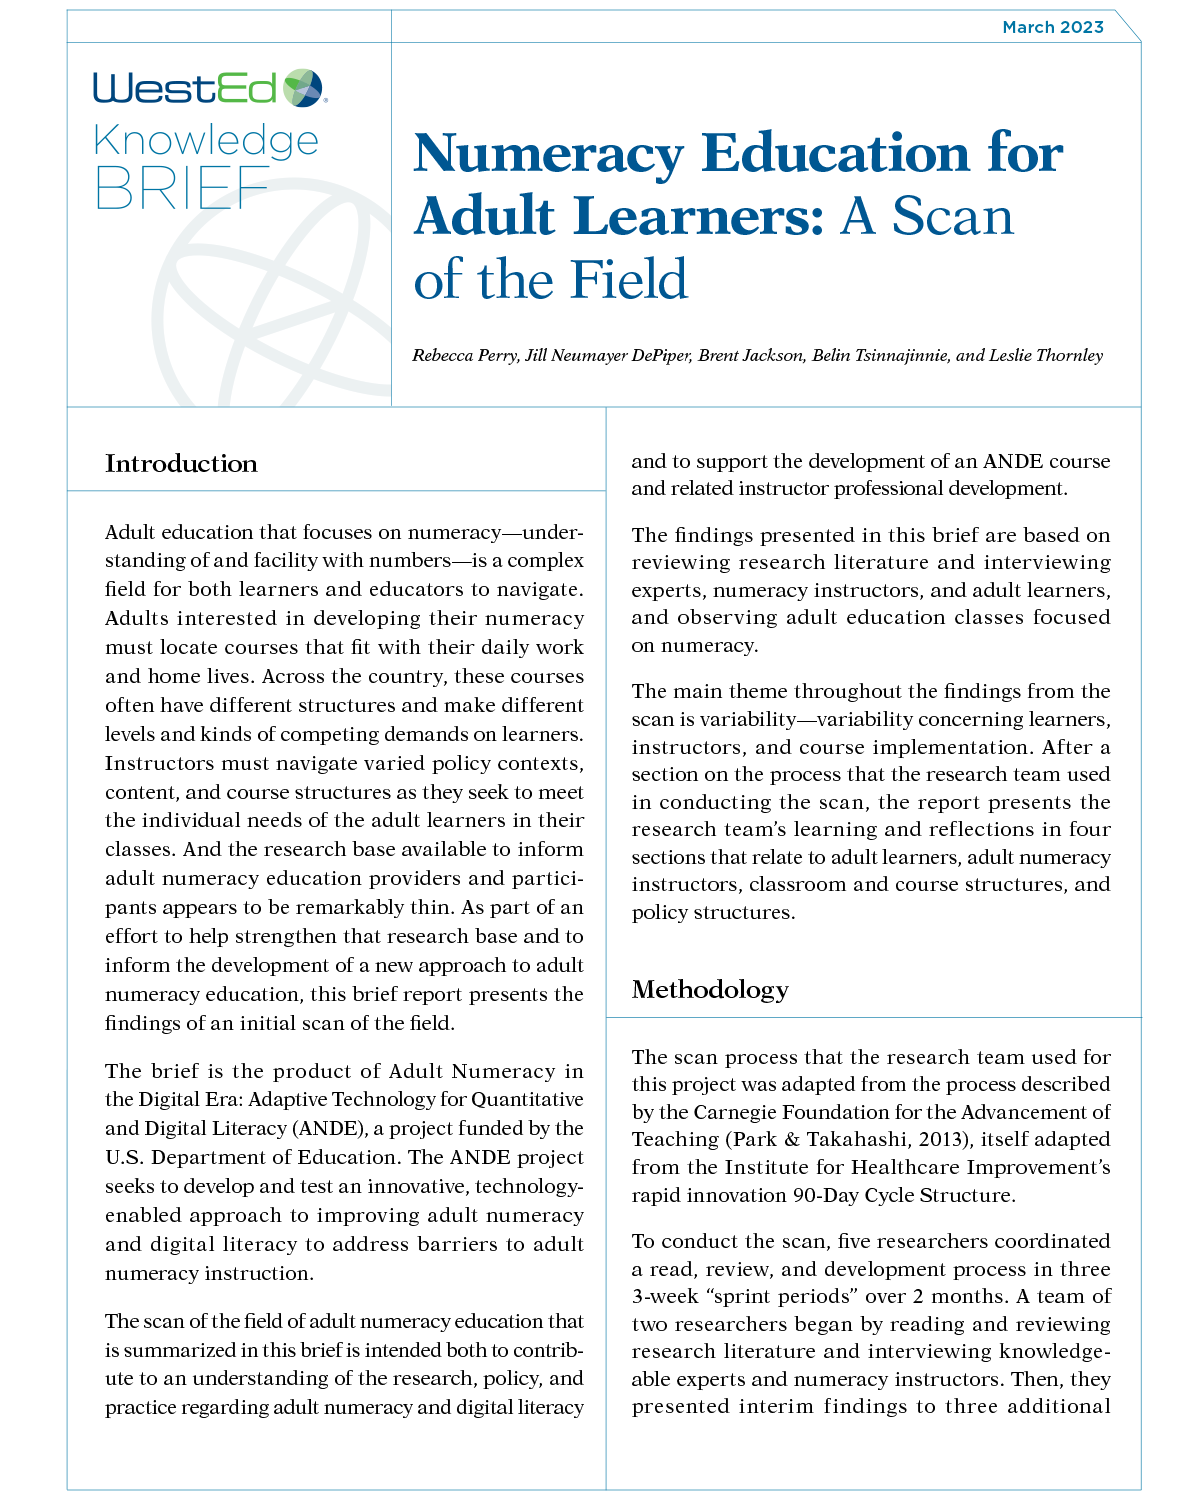 Numeracy Education for Adult Learners: A Scan of the Field